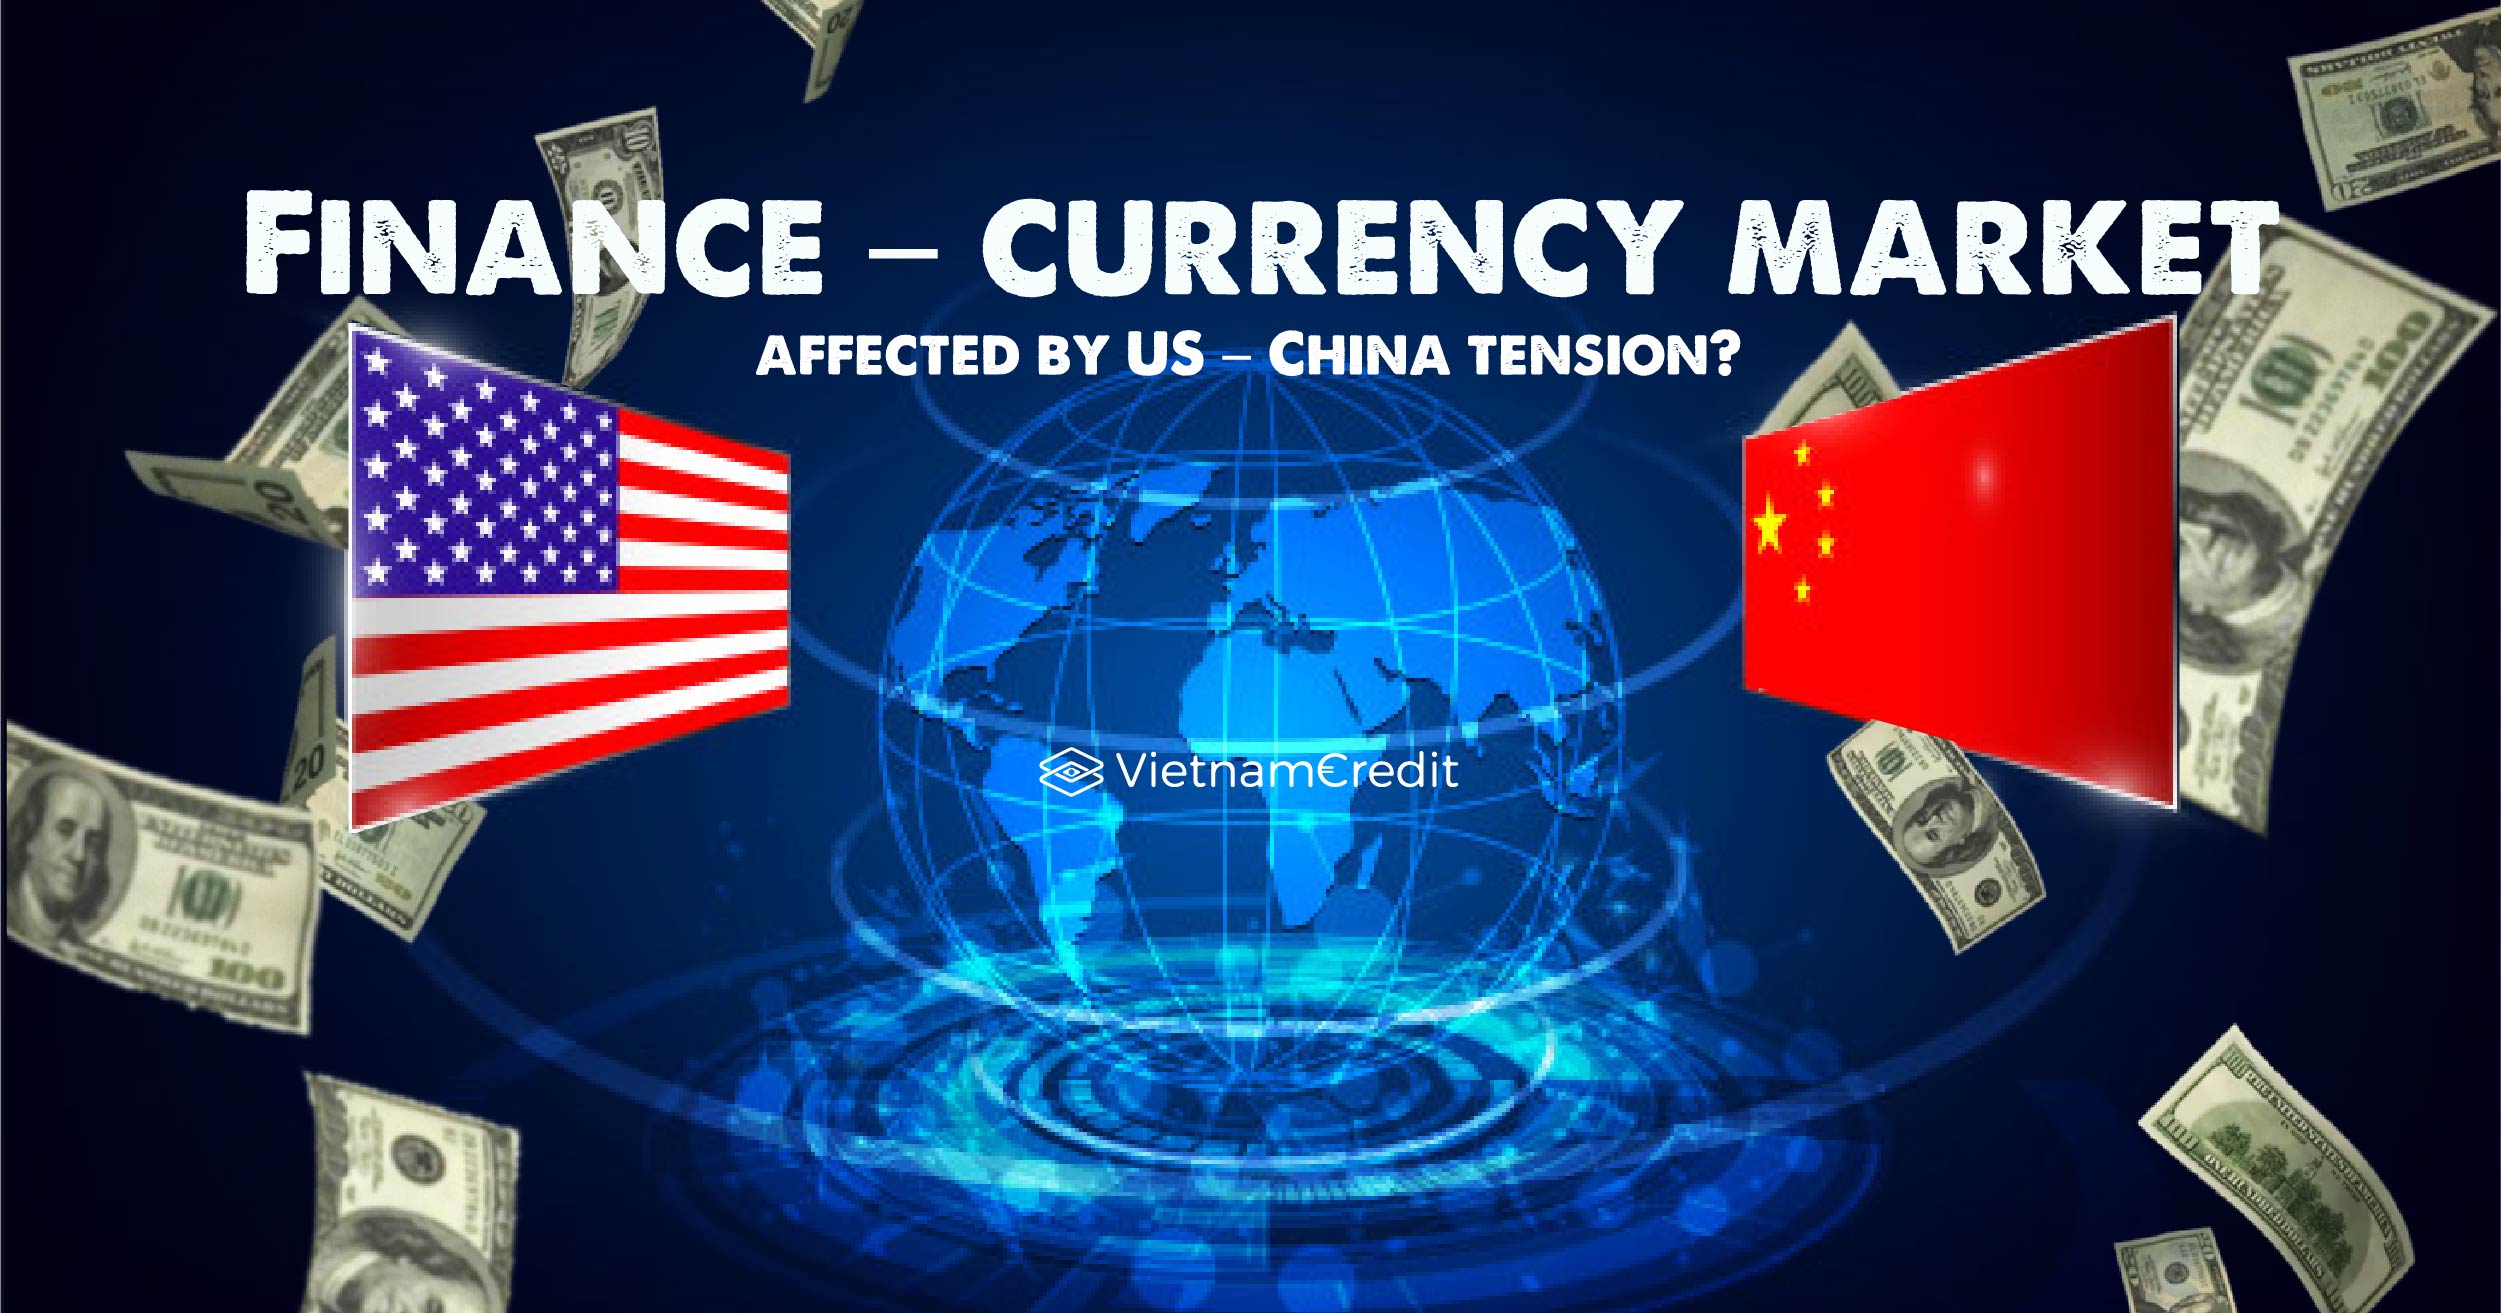 Finance – currency market affected by US-China tension?